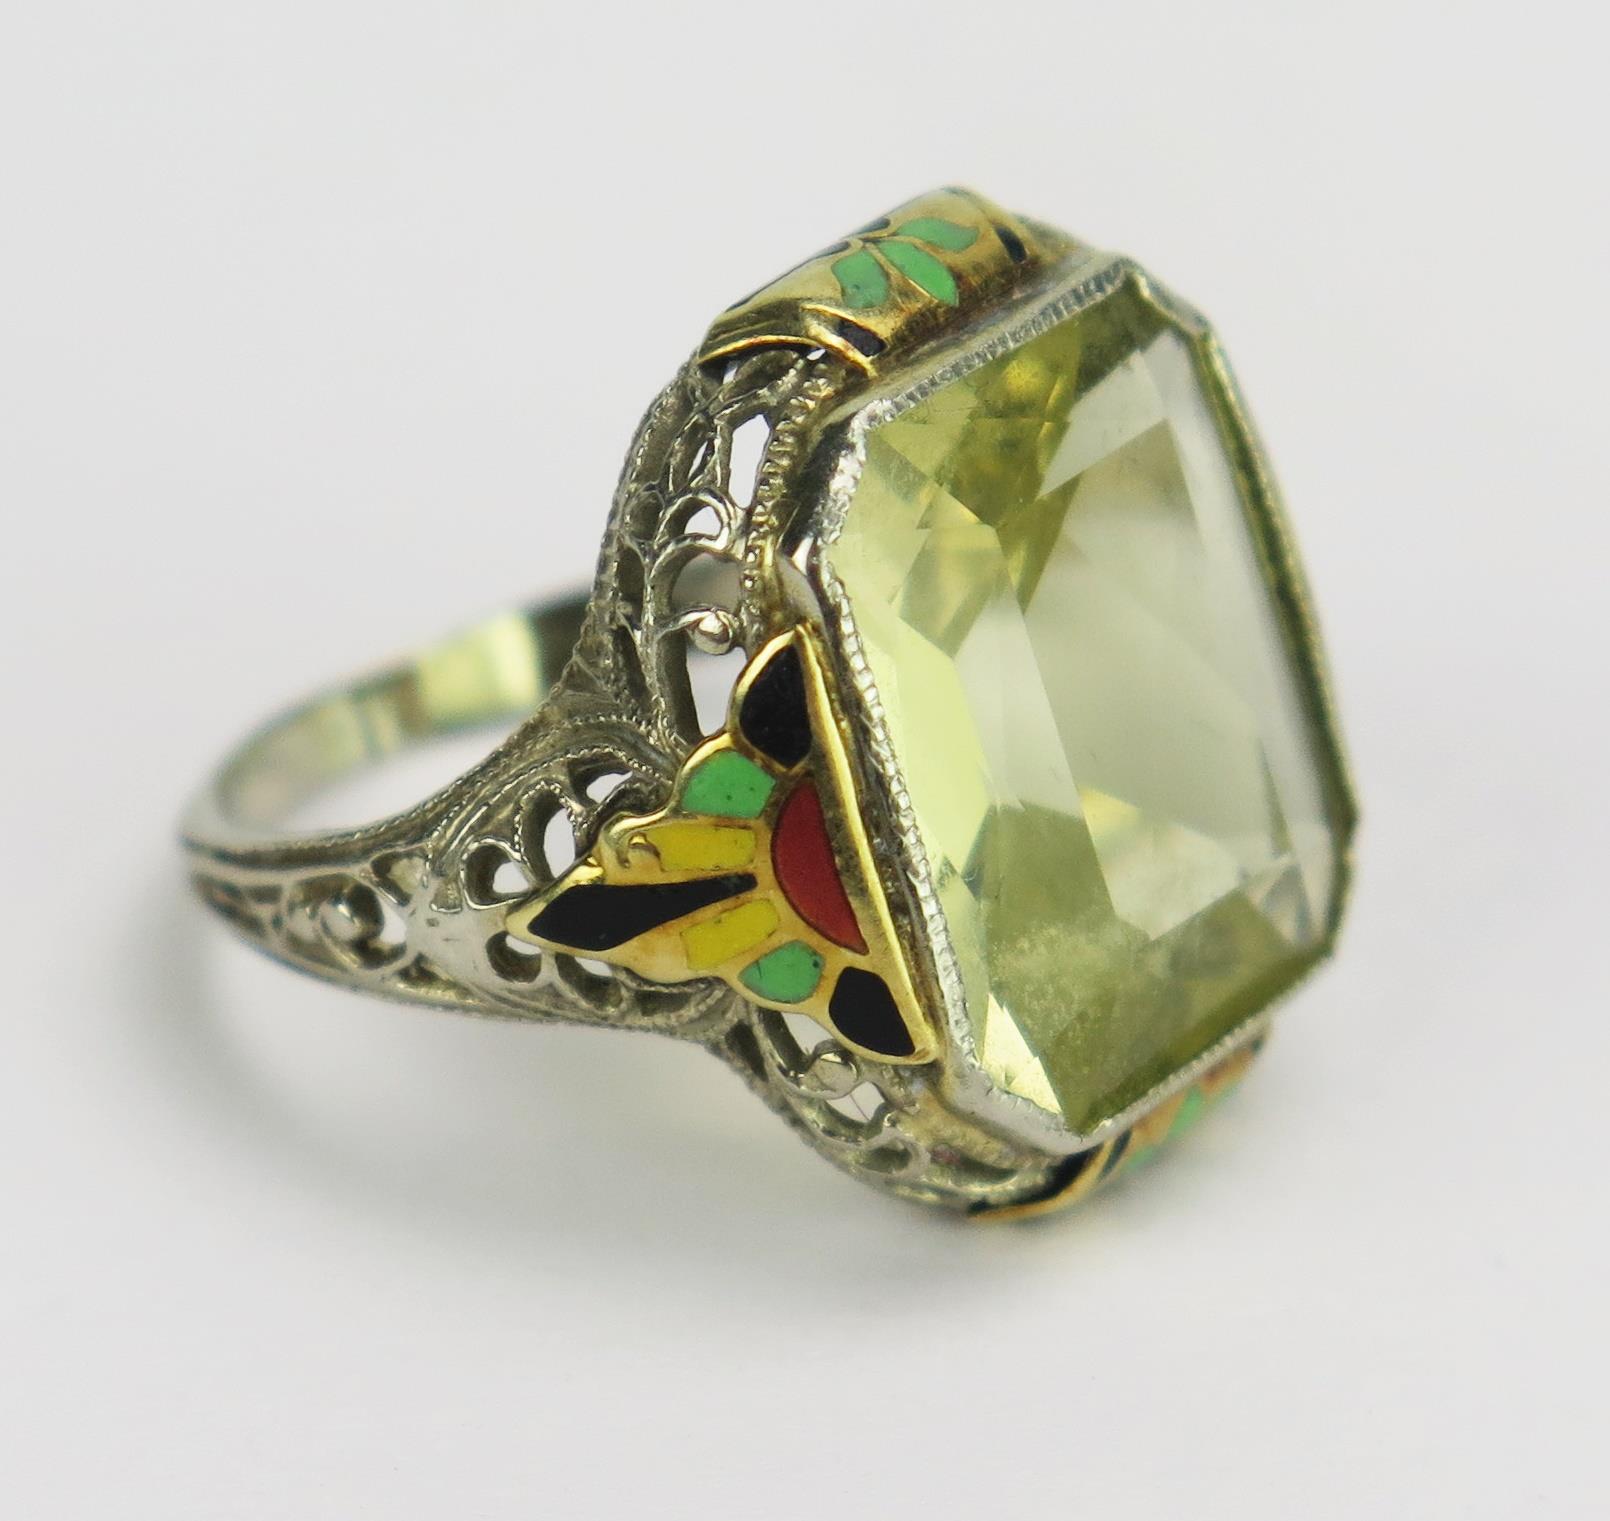 A White Gold, Citrine and Enamel Ring in an ornate pierced setting, 13.3x11.8mm stone, size H, - Bild 2 aus 2